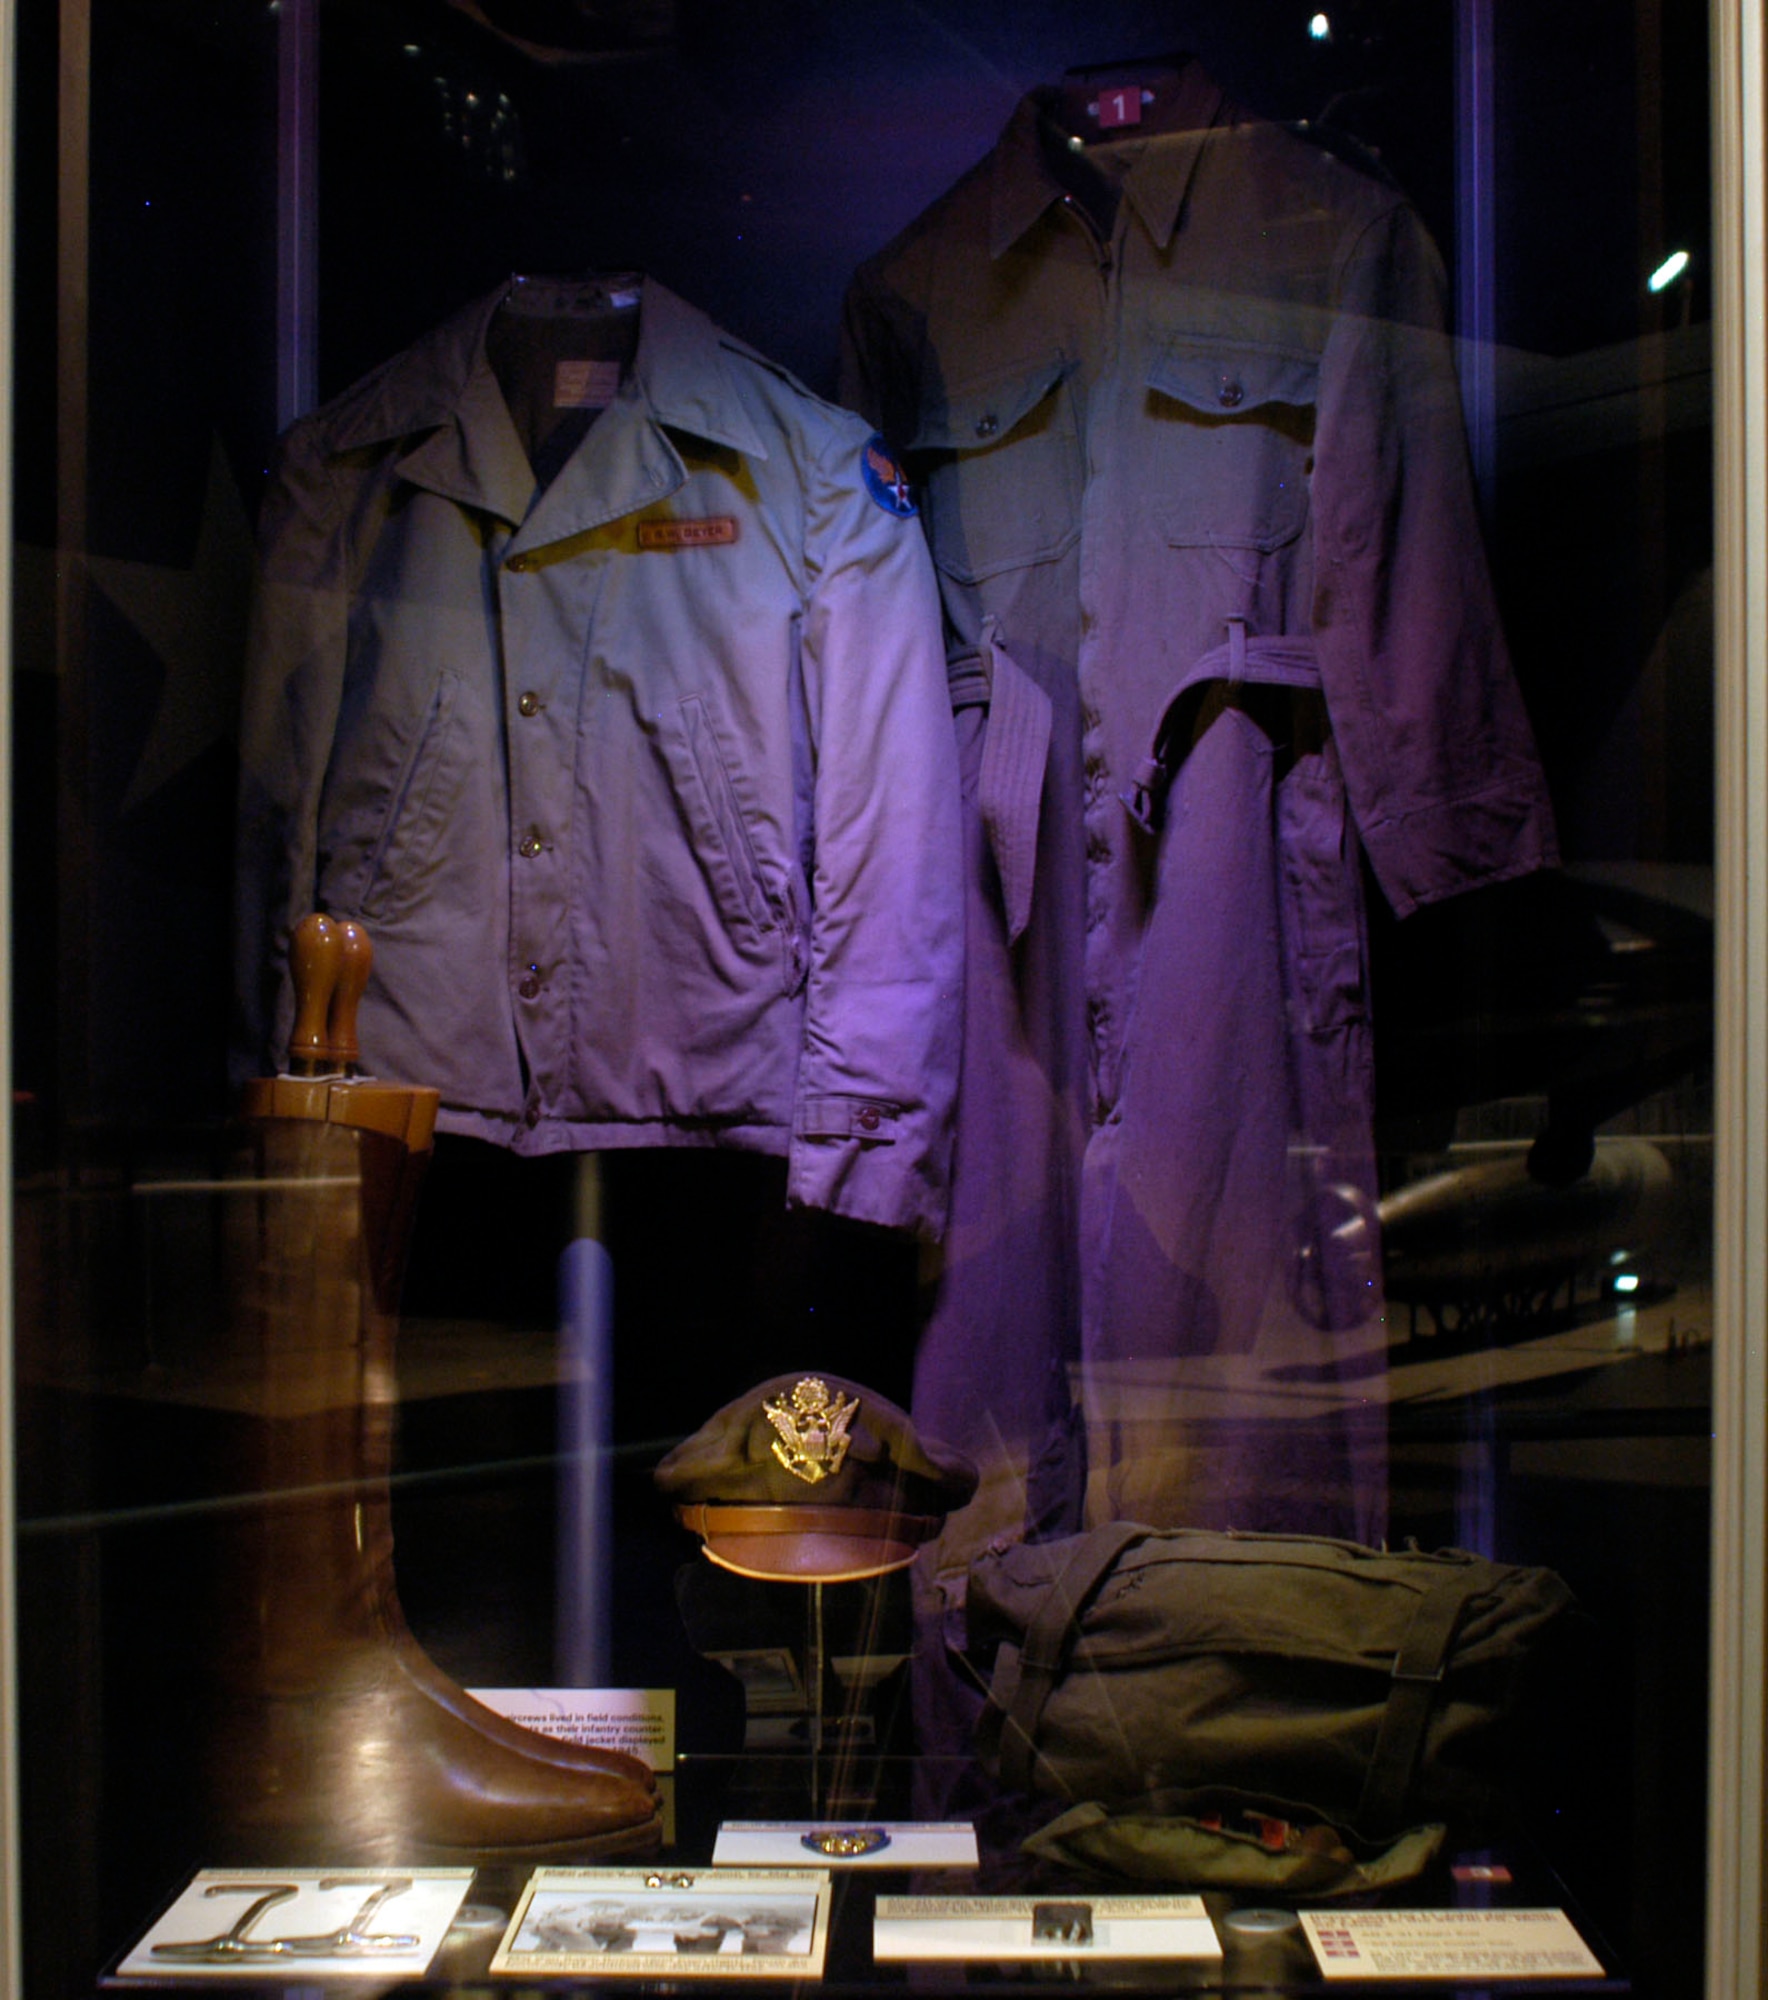 DAYTON, Ohio - 9th Air Force field jacket on display in the World War II Gallery at the National Museum of the U.S. Air Force. (U.S. Air Force photo)